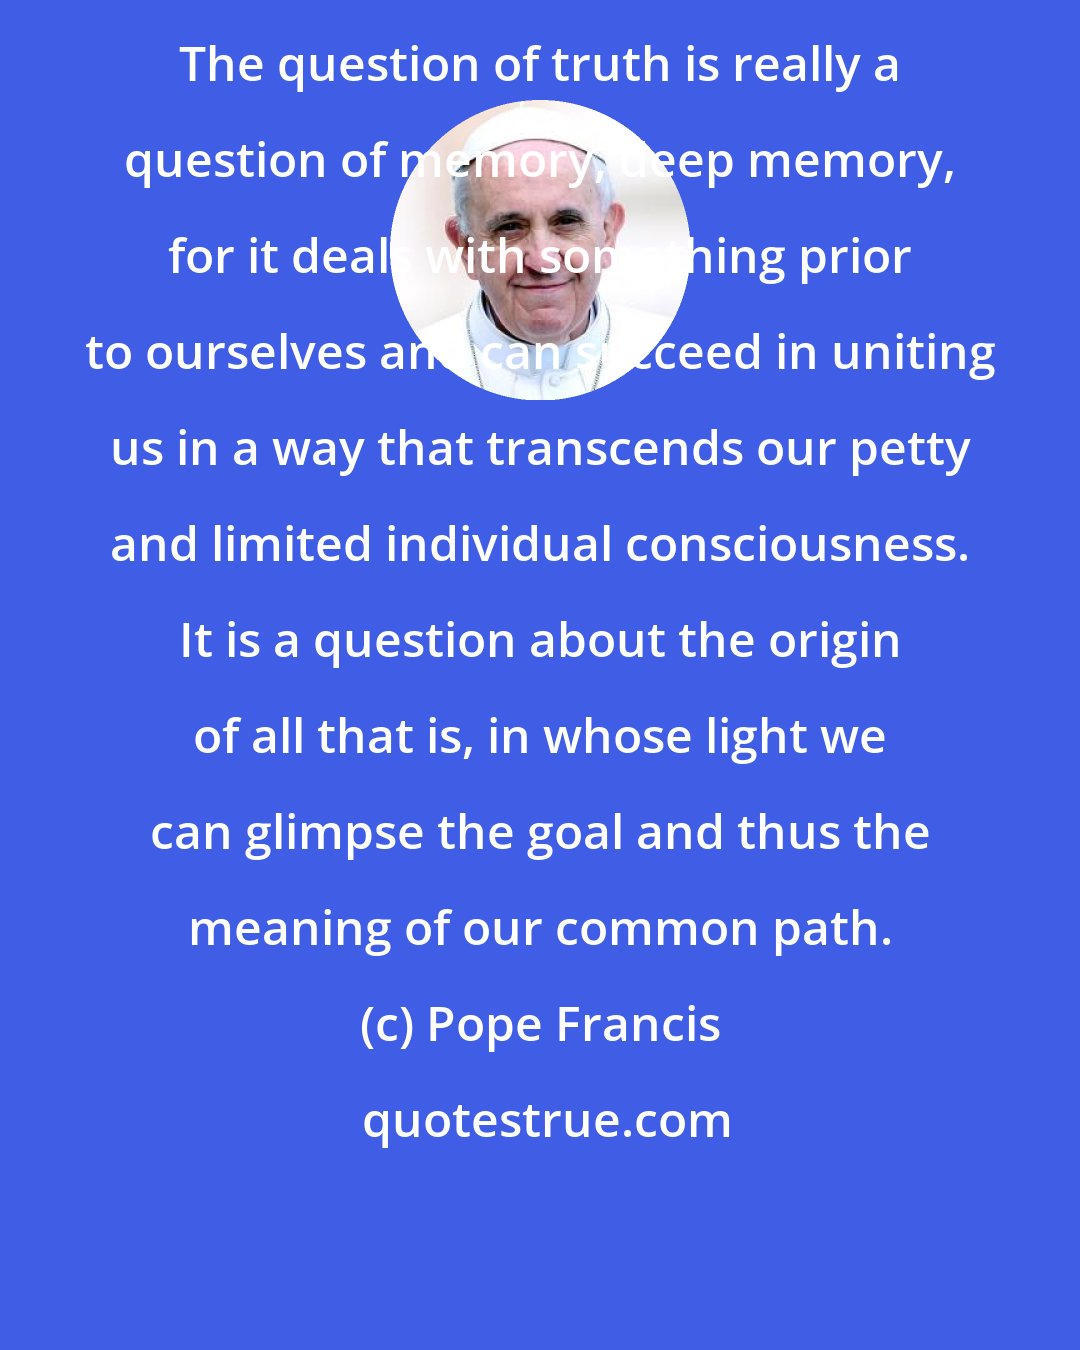 Pope Francis: The question of truth is really a question of memory, deep memory, for it deals with something prior to ourselves and can succeed in uniting us in a way that transcends our petty and limited individual consciousness. It is a question about the origin of all that is, in whose light we can glimpse the goal and thus the meaning of our common path.